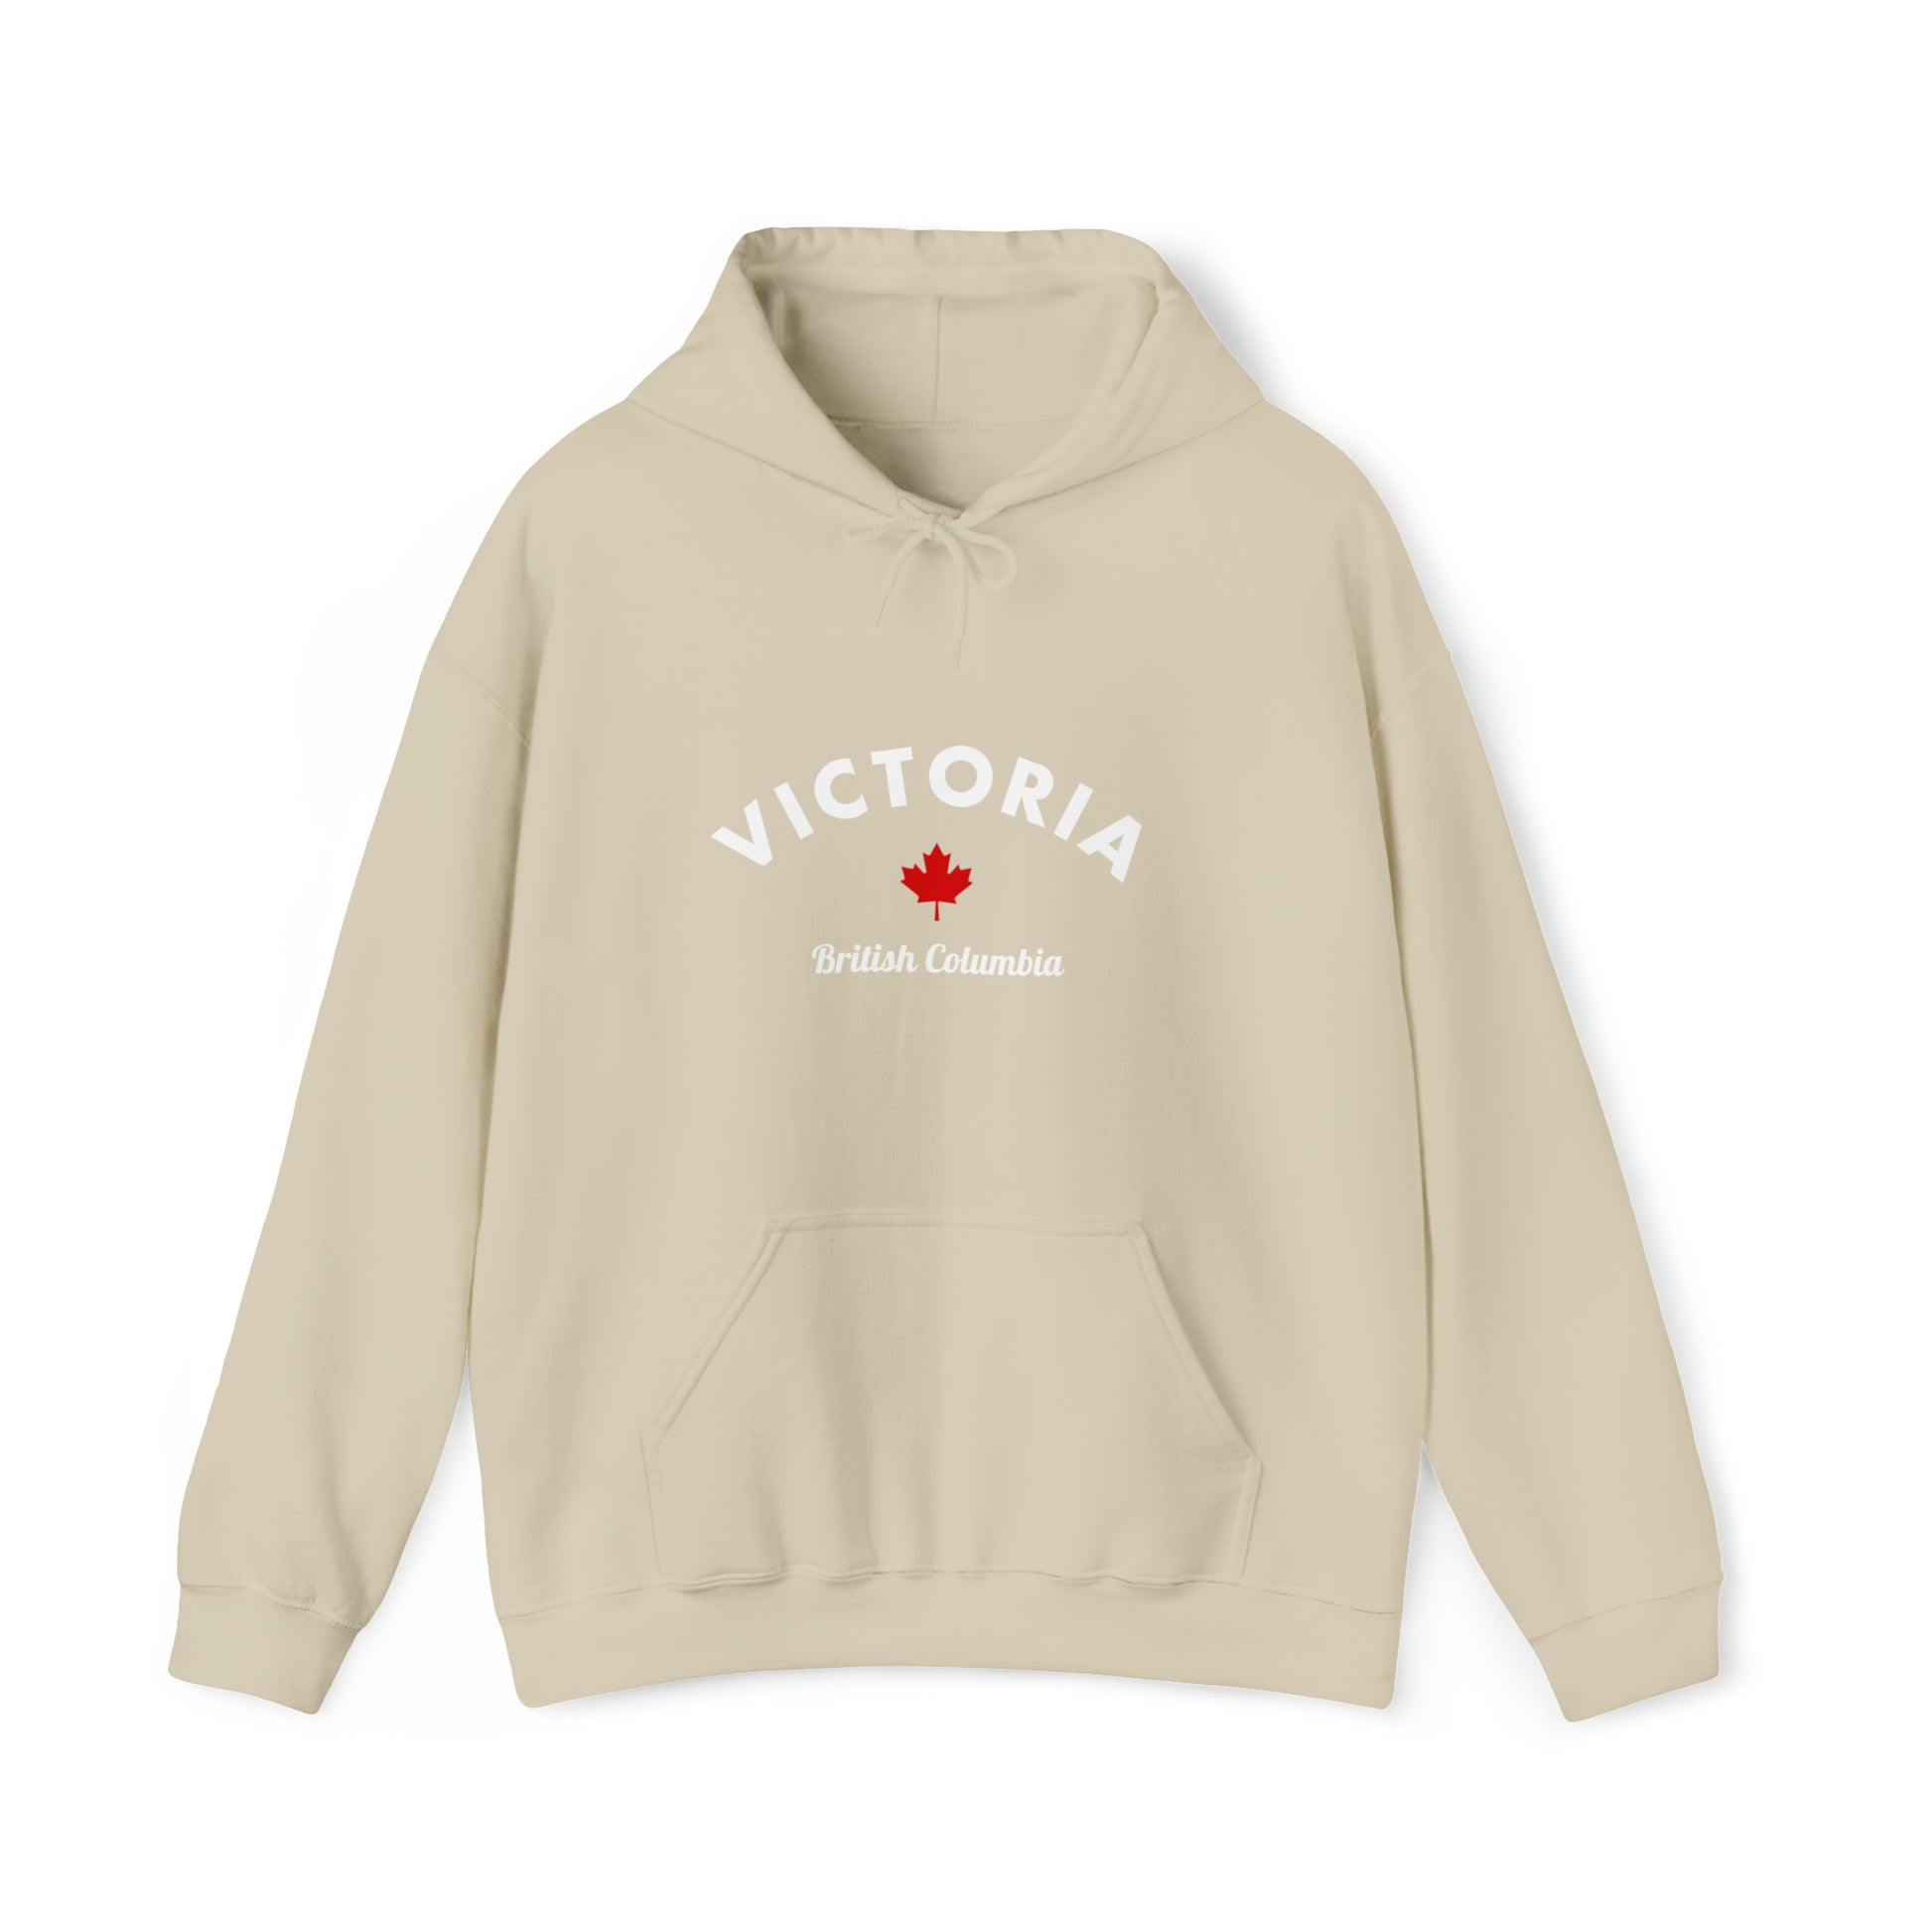 S Sand Victoria BC Hoodie from HoodySZN.com